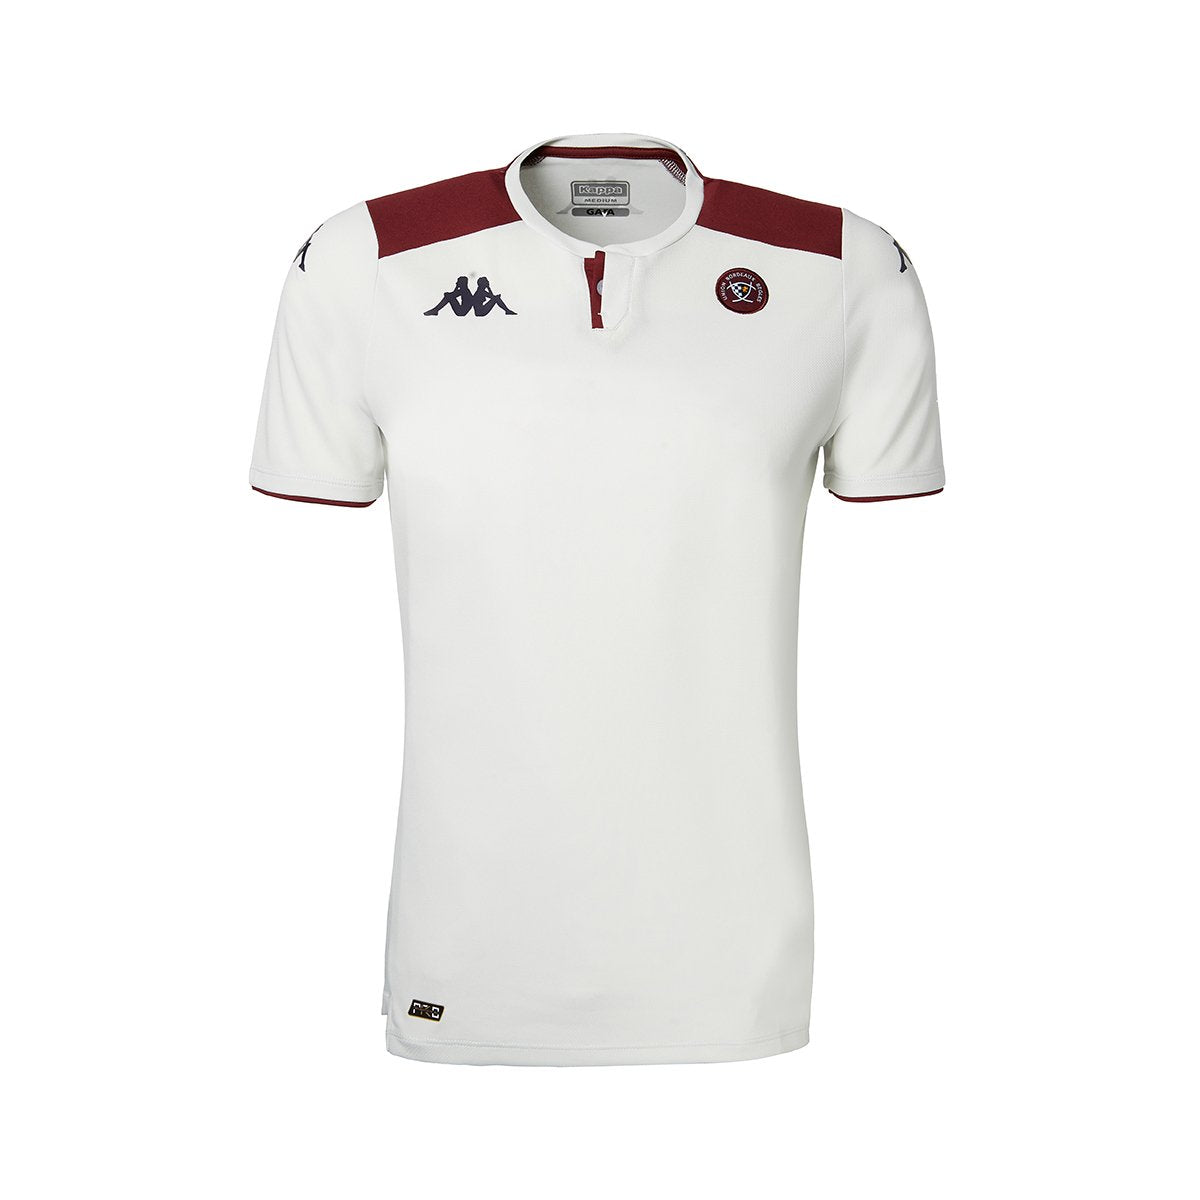 Polo Abiang Pro 5 UBB Rugby hombre Gris - Imagen 1